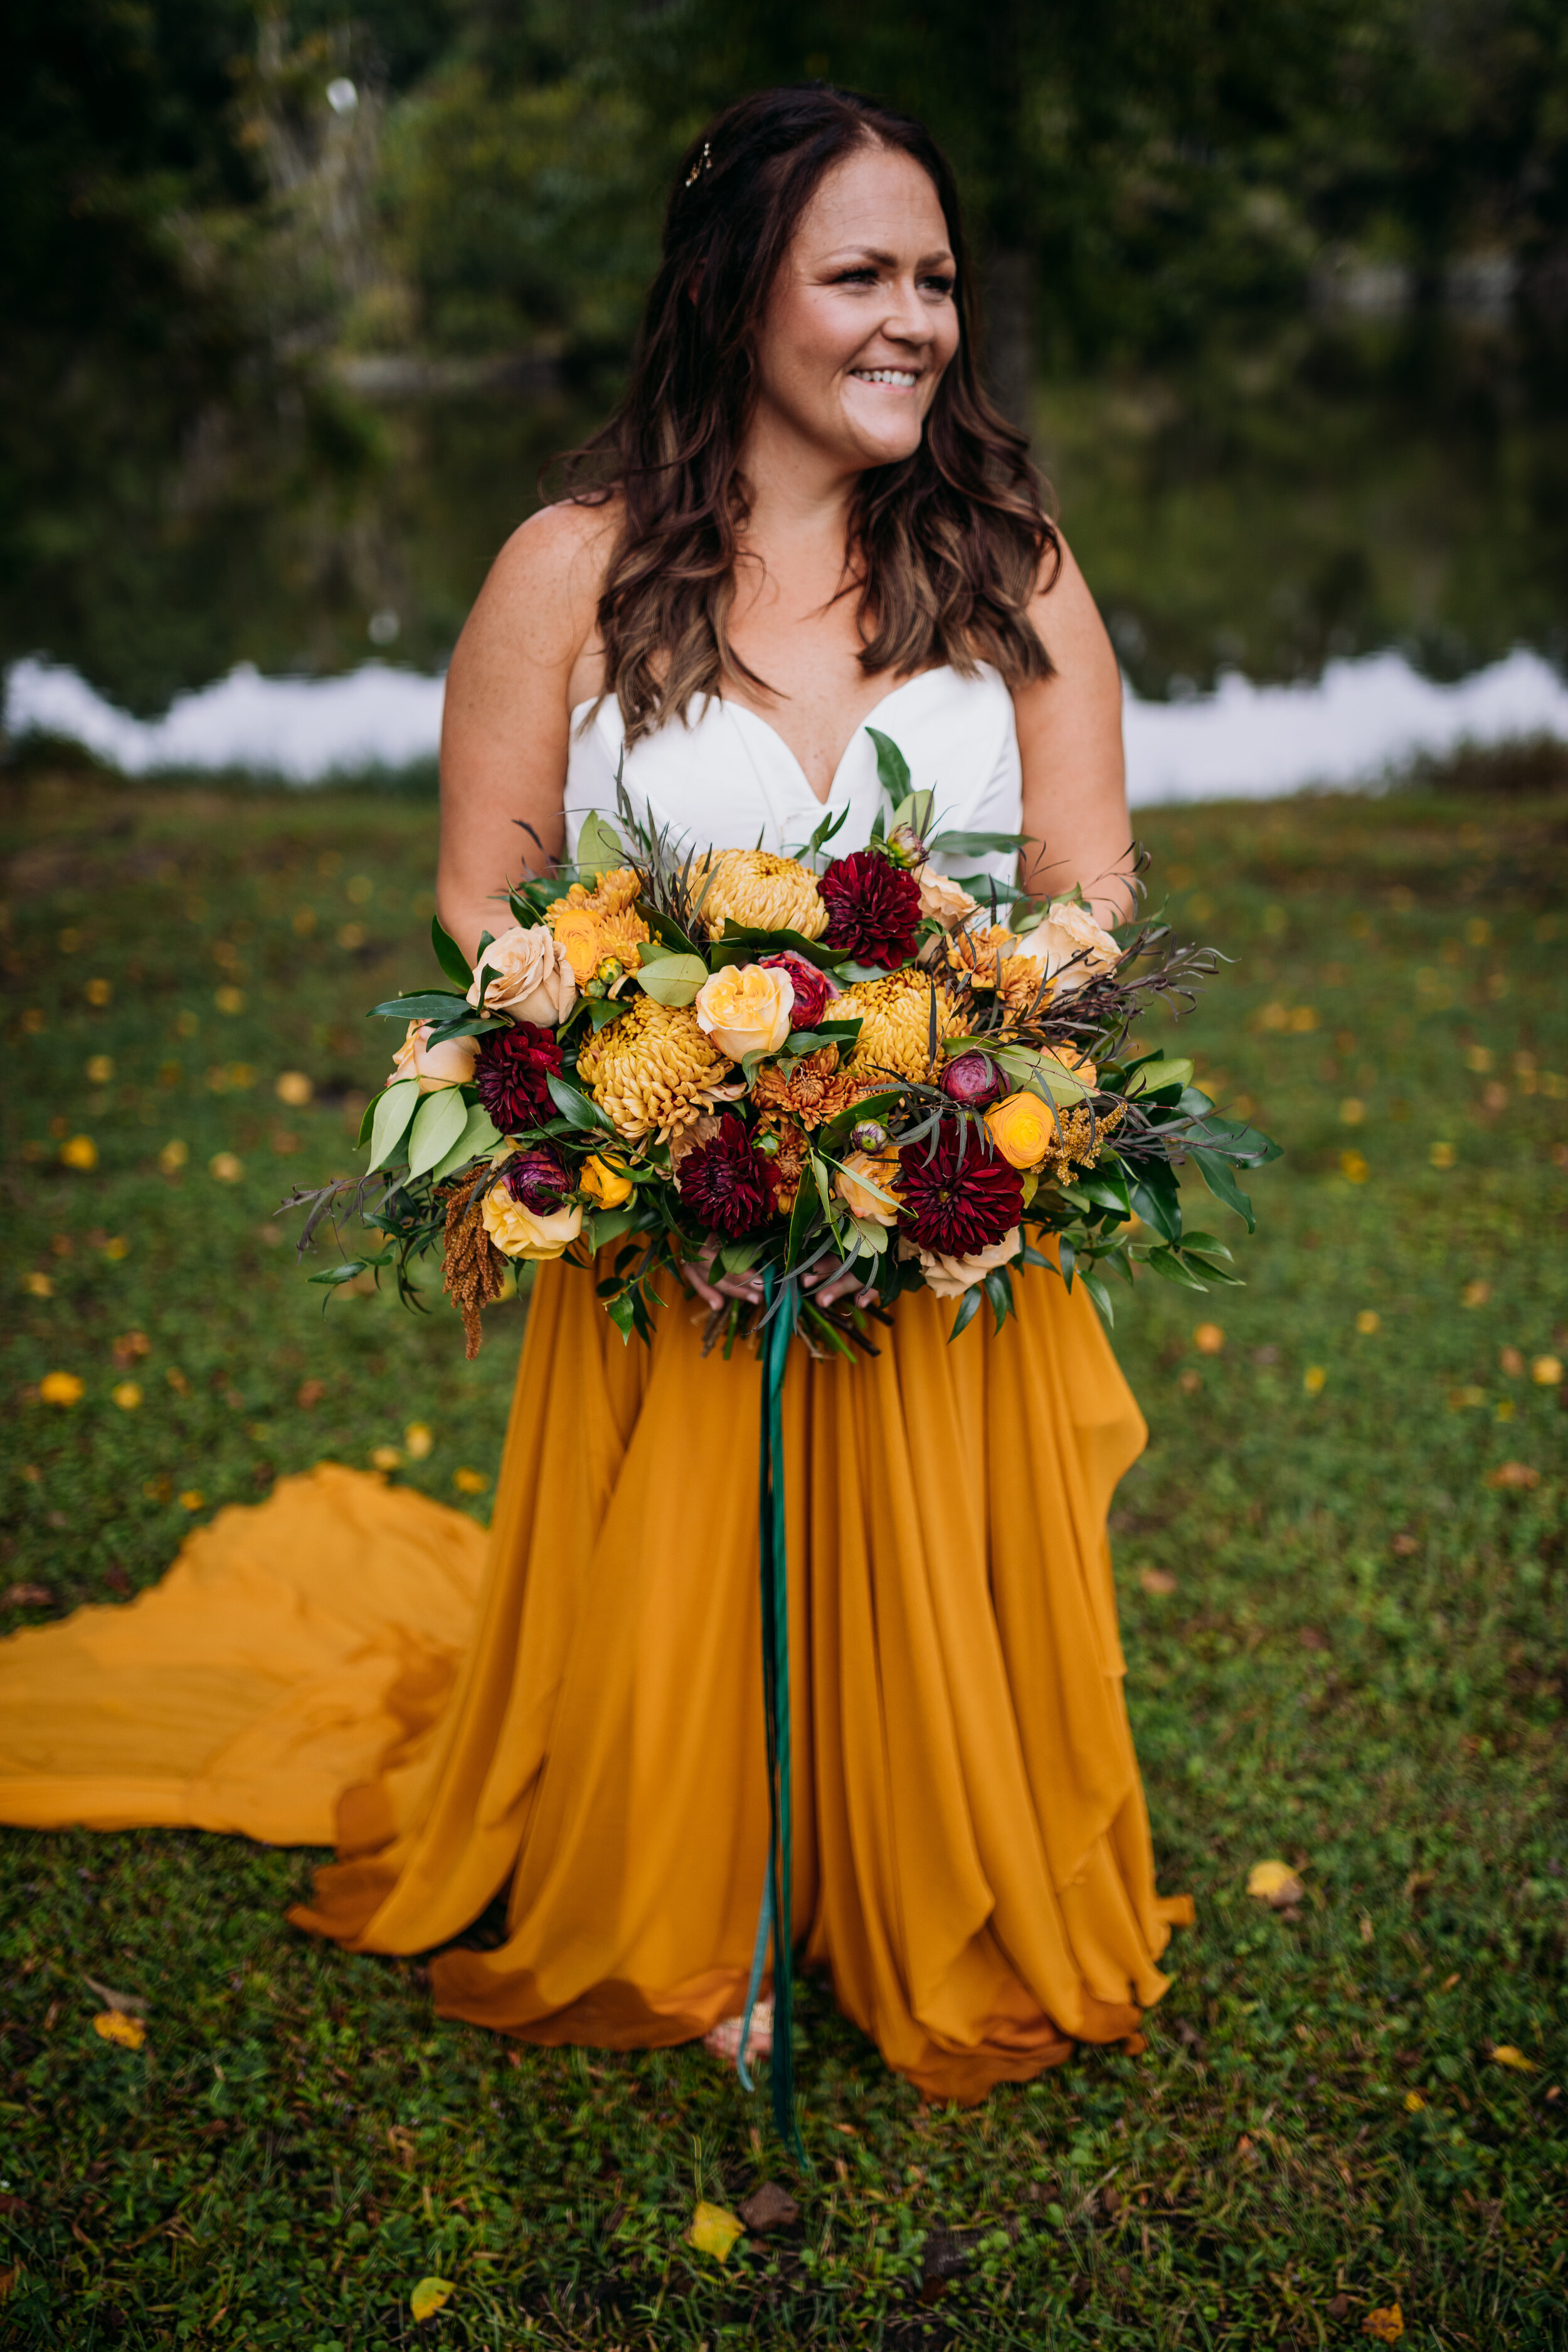 ivory-and-beau-florals-alex-and-david-red-gate-farms-wedding-flowers-wedding-florals-savannah-wedding-savannah-florist-wedding-florist-colorful-rich-bold-inspiration-flowers-Bowles405.jpg